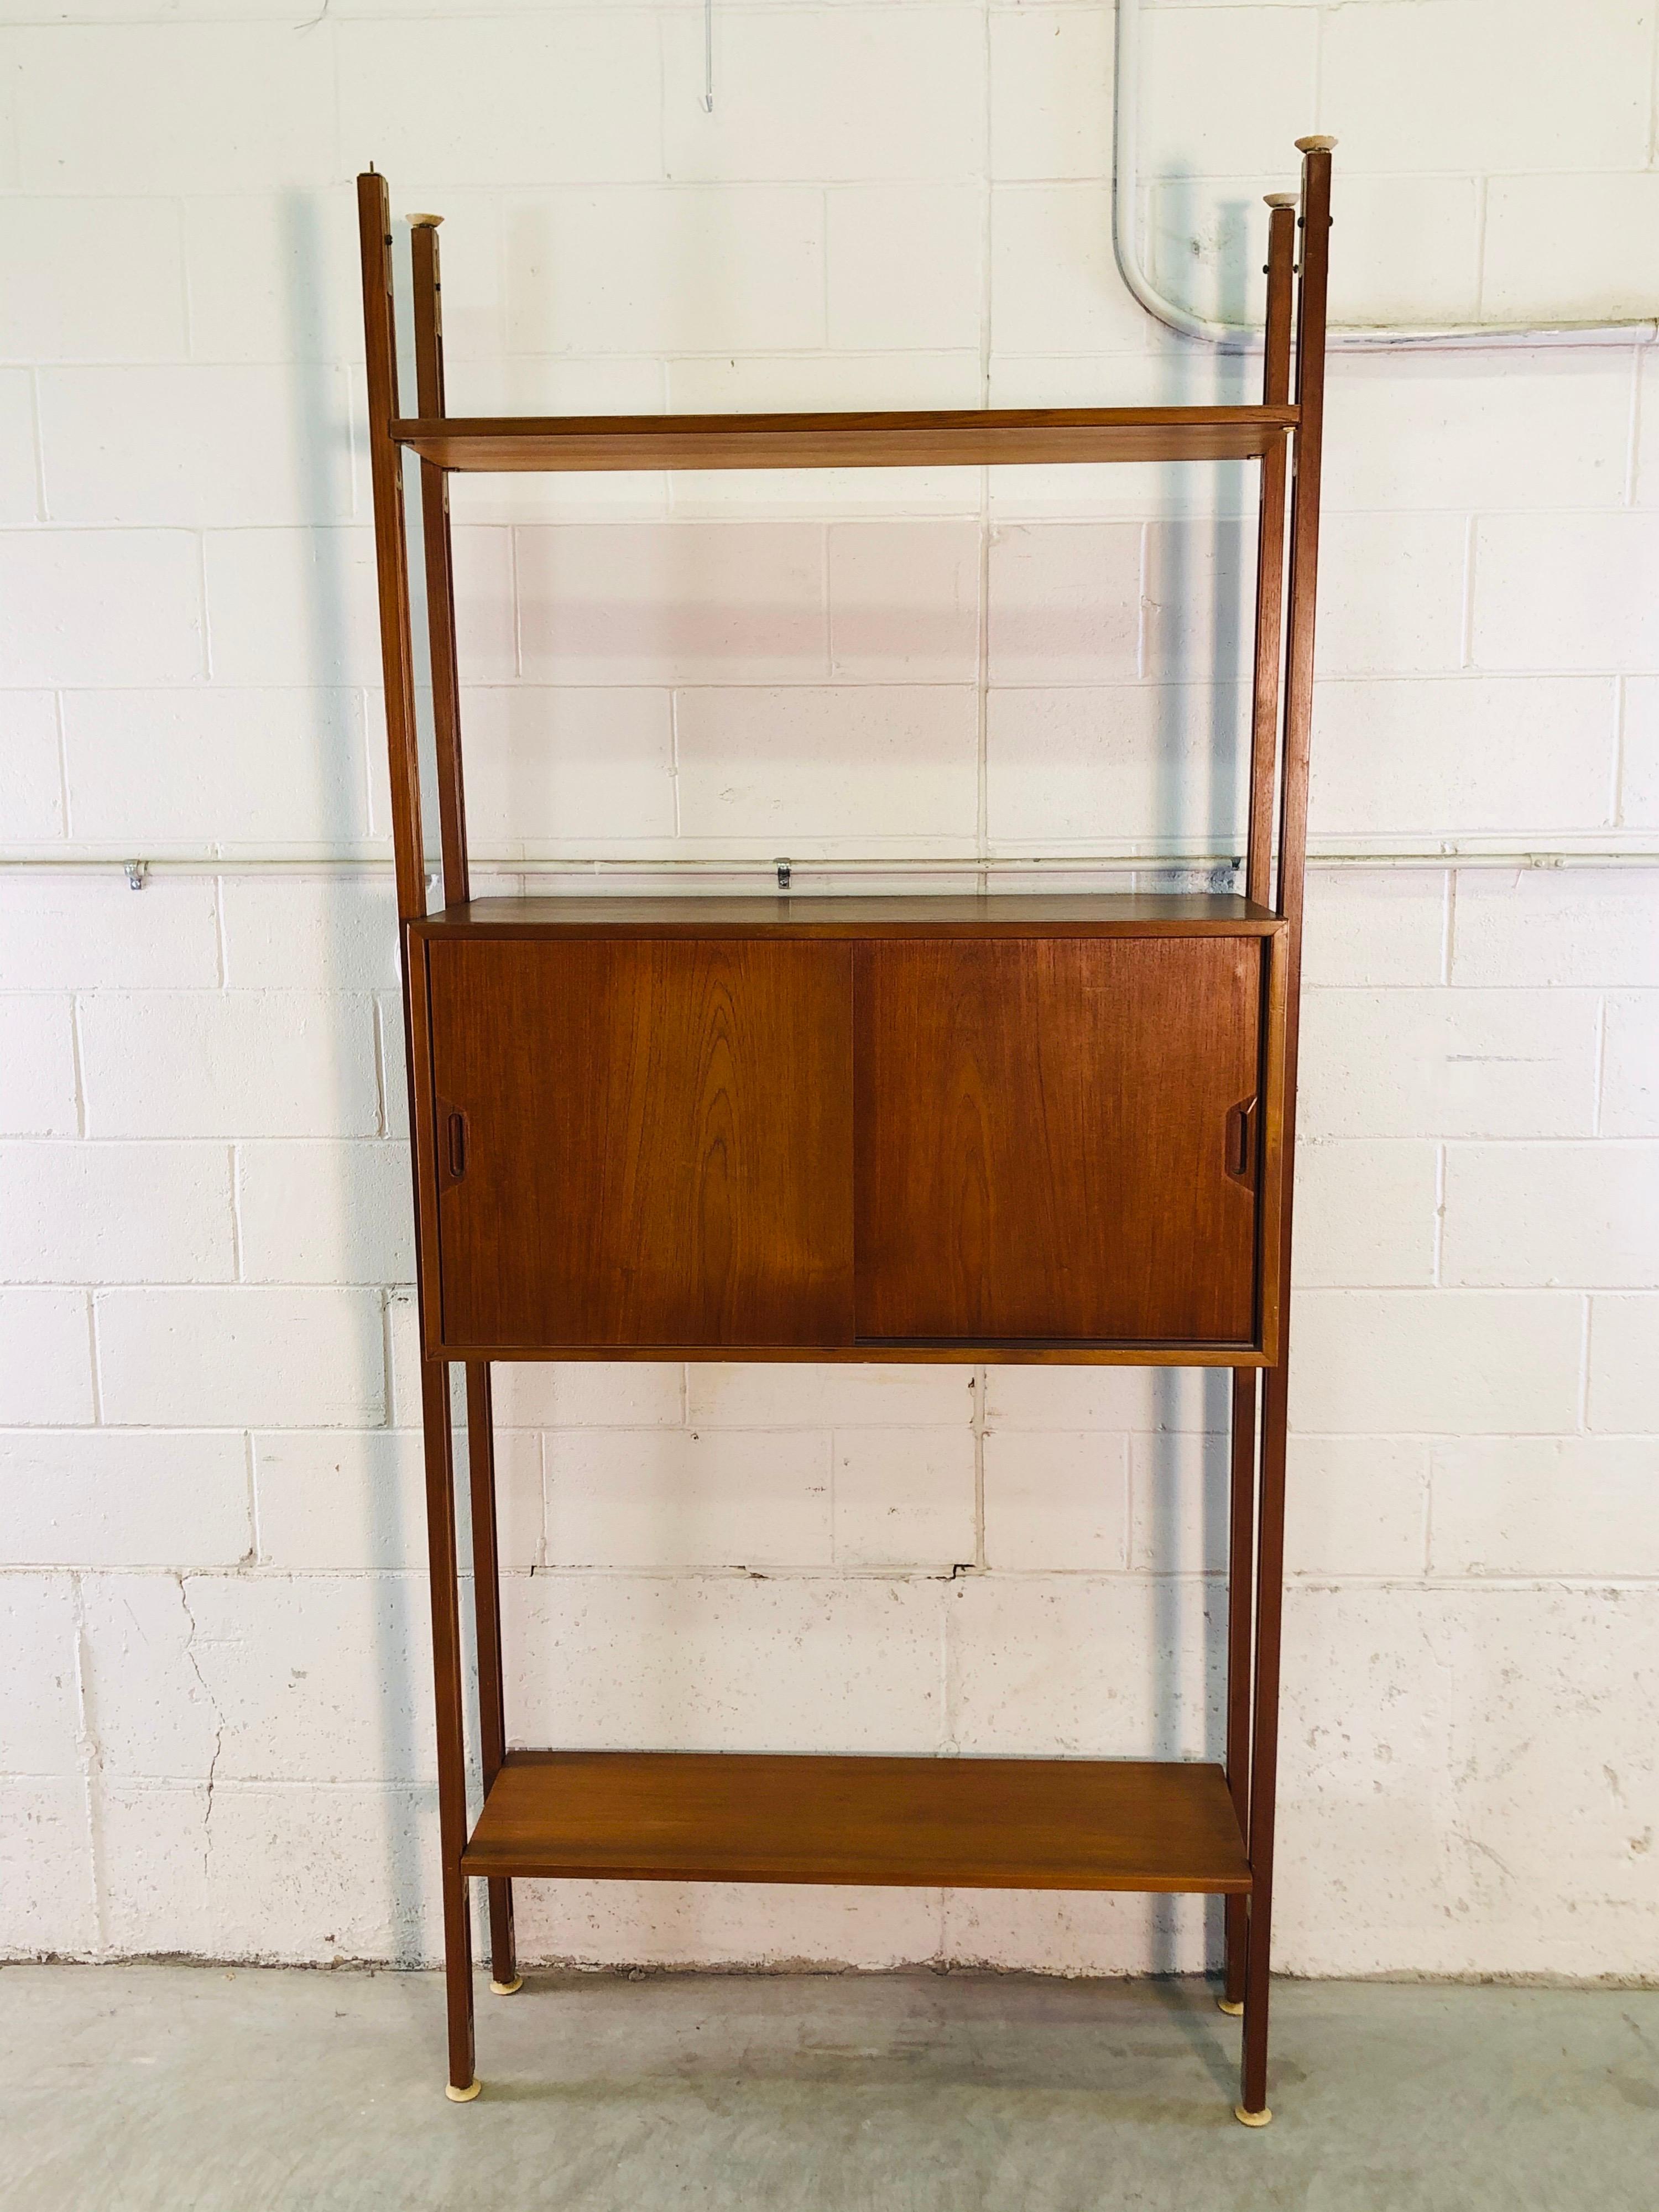 Vintage 1960s Danish teak room divider wall unit. The room divider is fully adjustable and can be configured any way you want. Comes with two shelves and a cabinet. Max adjustment height is about 95” H. No marks.